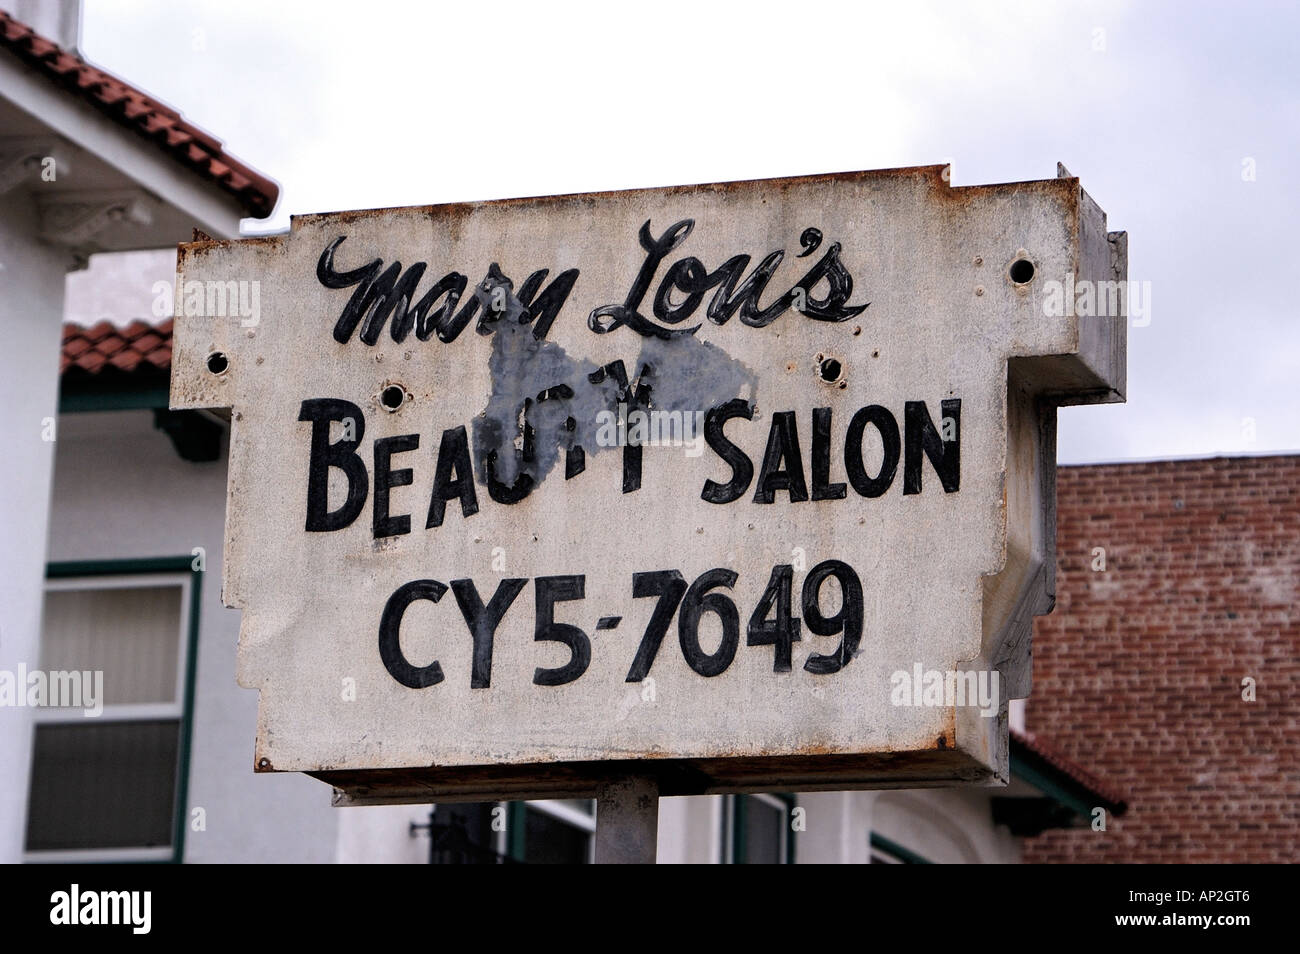 Beauty salon sign showing old style exchange telephone number Hillcrest, San Diego California USA Stock Photo